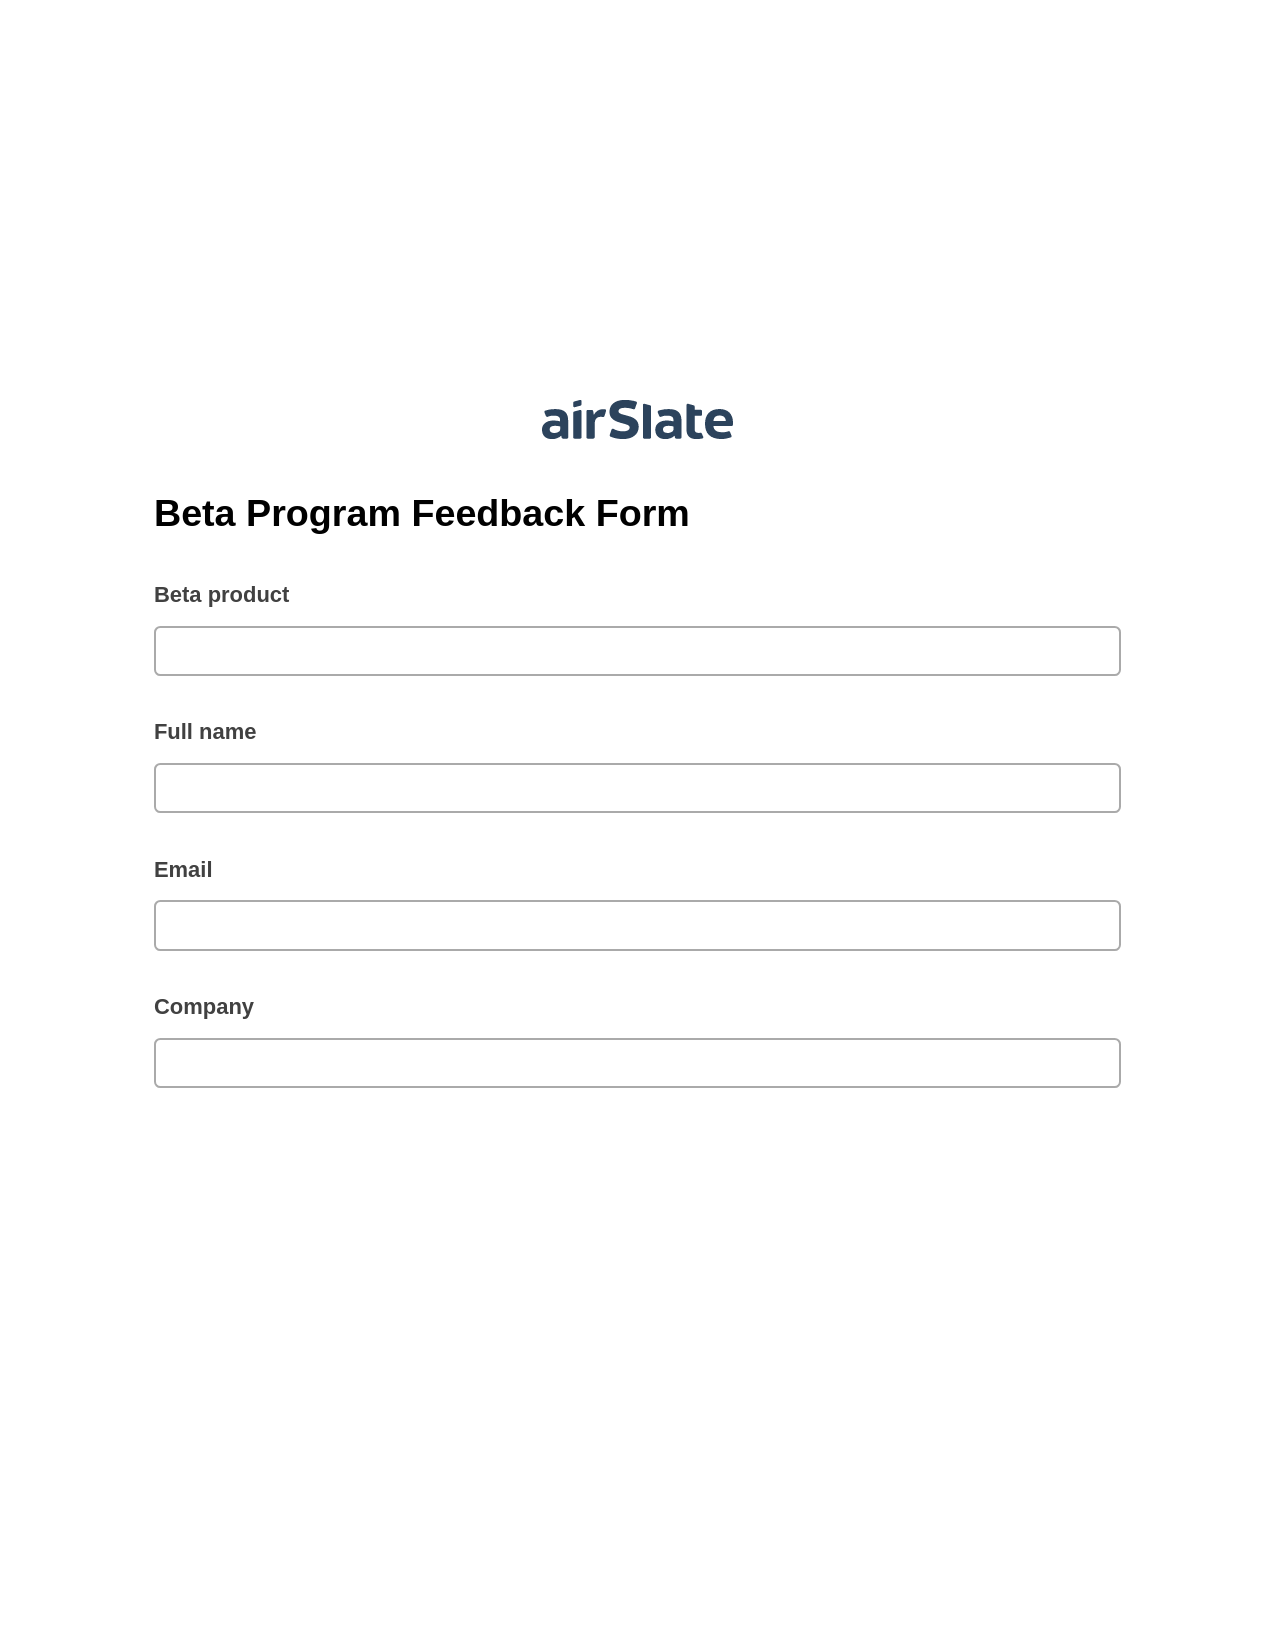 Multirole Beta Program Feedback Form Pre-fill from another Slate Bot, Audit Trail Bot, Export to Google Sheet Bot